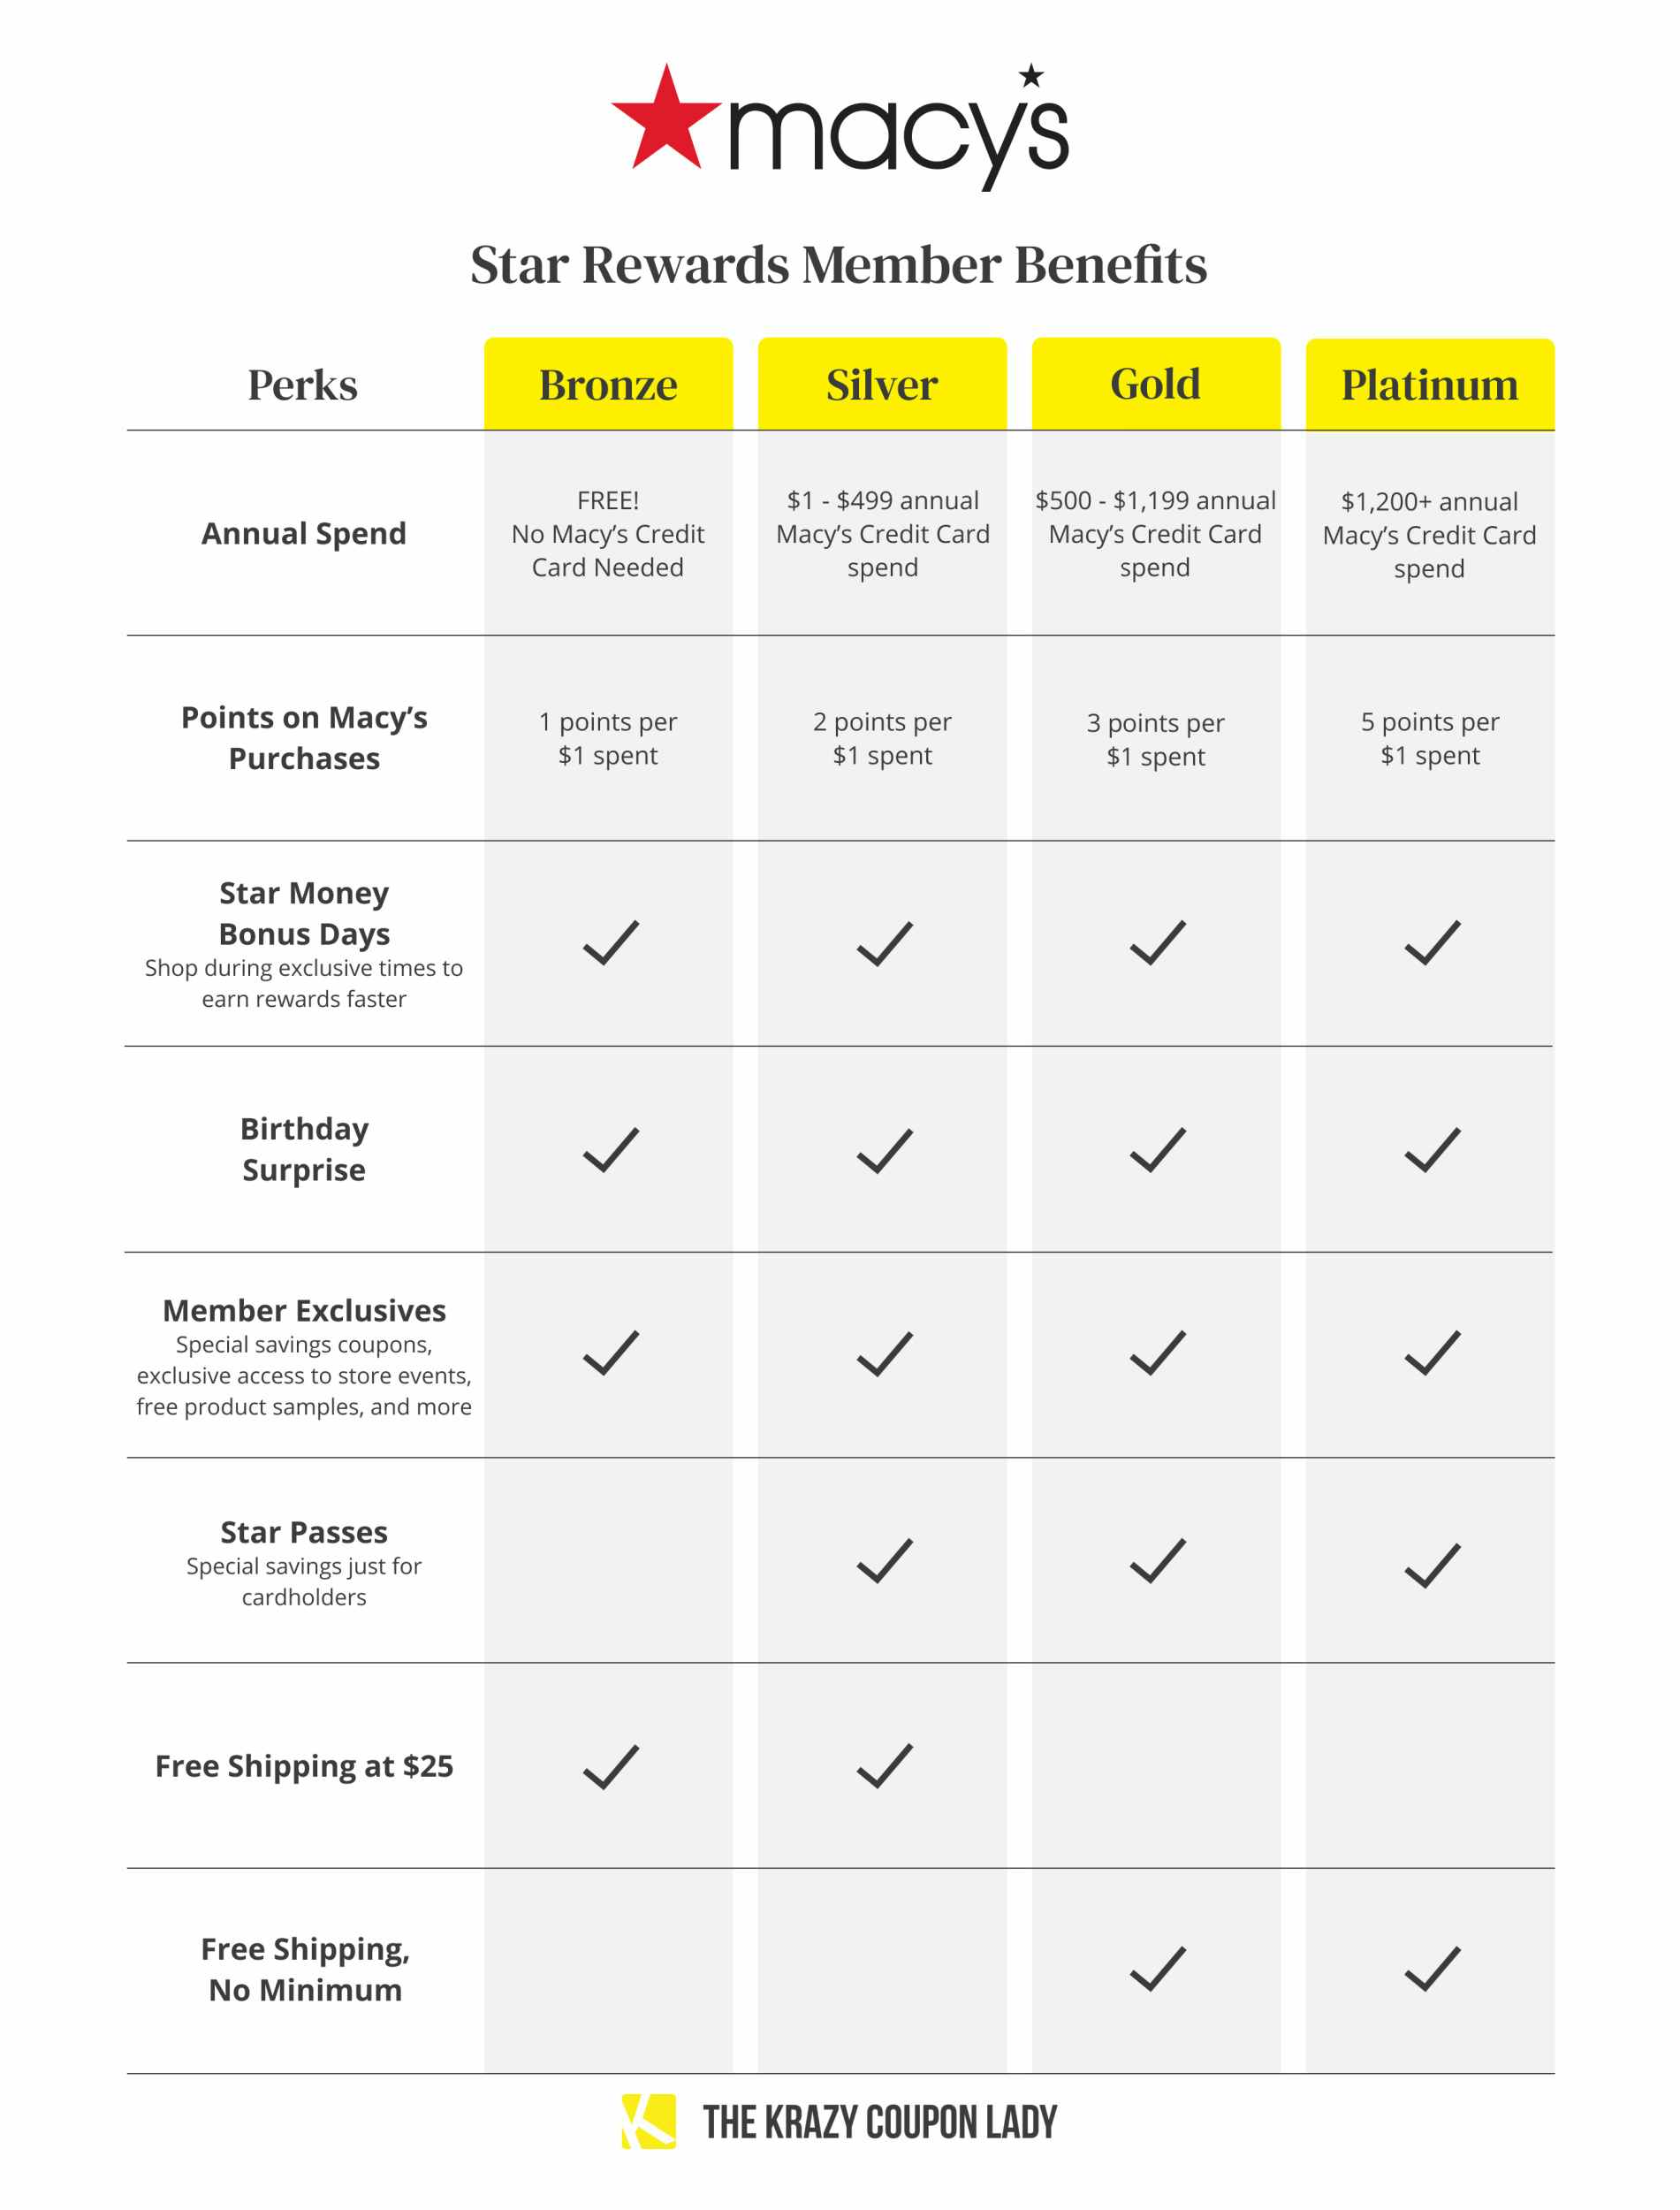 a table comparing all the membership benefits of Macy's Star Rewards, depending on your rewards status